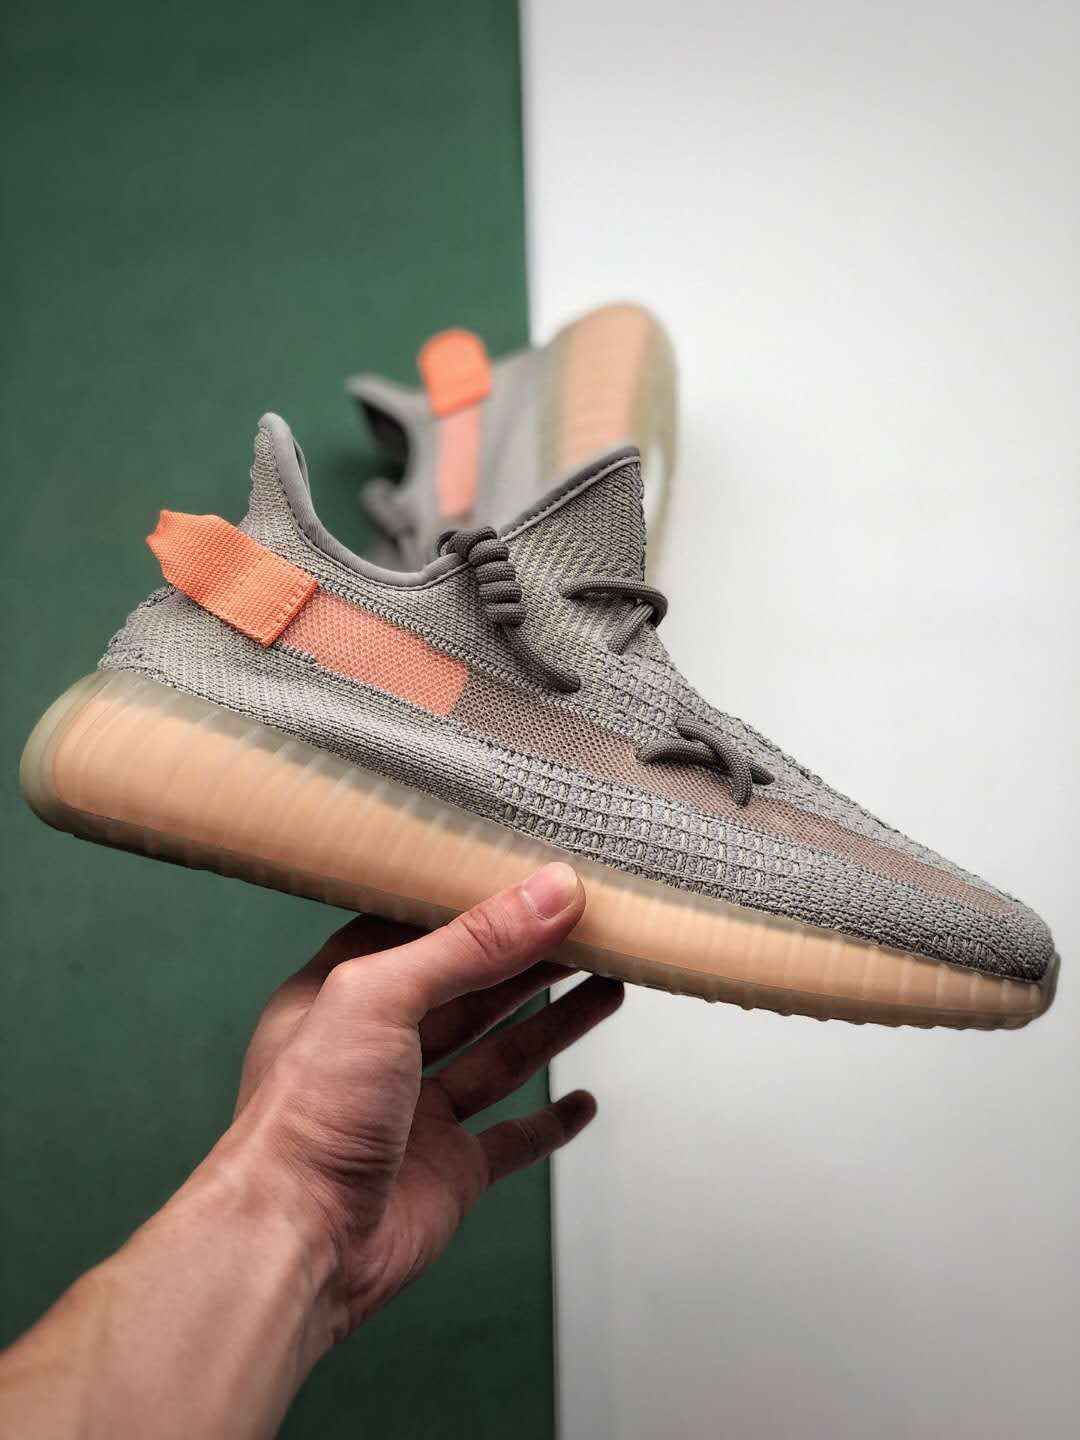 Adidas Yeezy Boost 350 V2 Trfrm EG7492 - Get the Latest Style and Updates